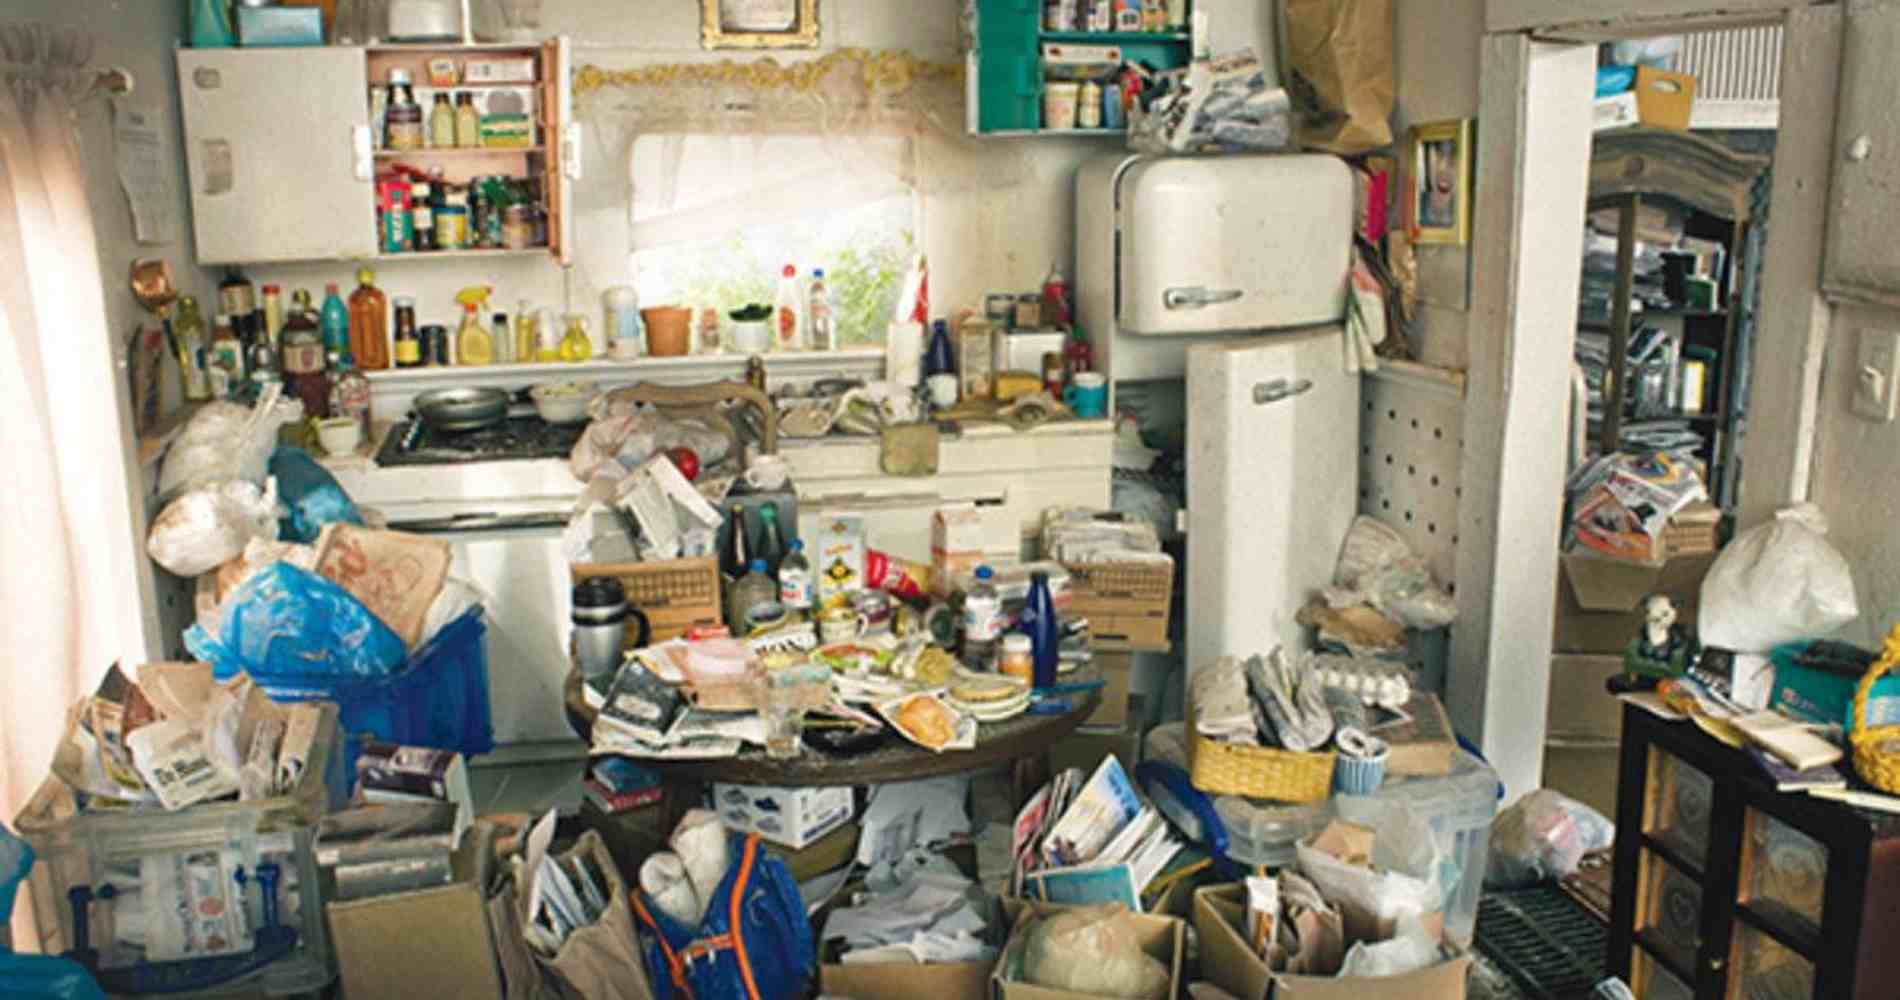 #1 for Hoarding Cleanup in Sun City, AZ with Over 1200 5-Star Reviews!